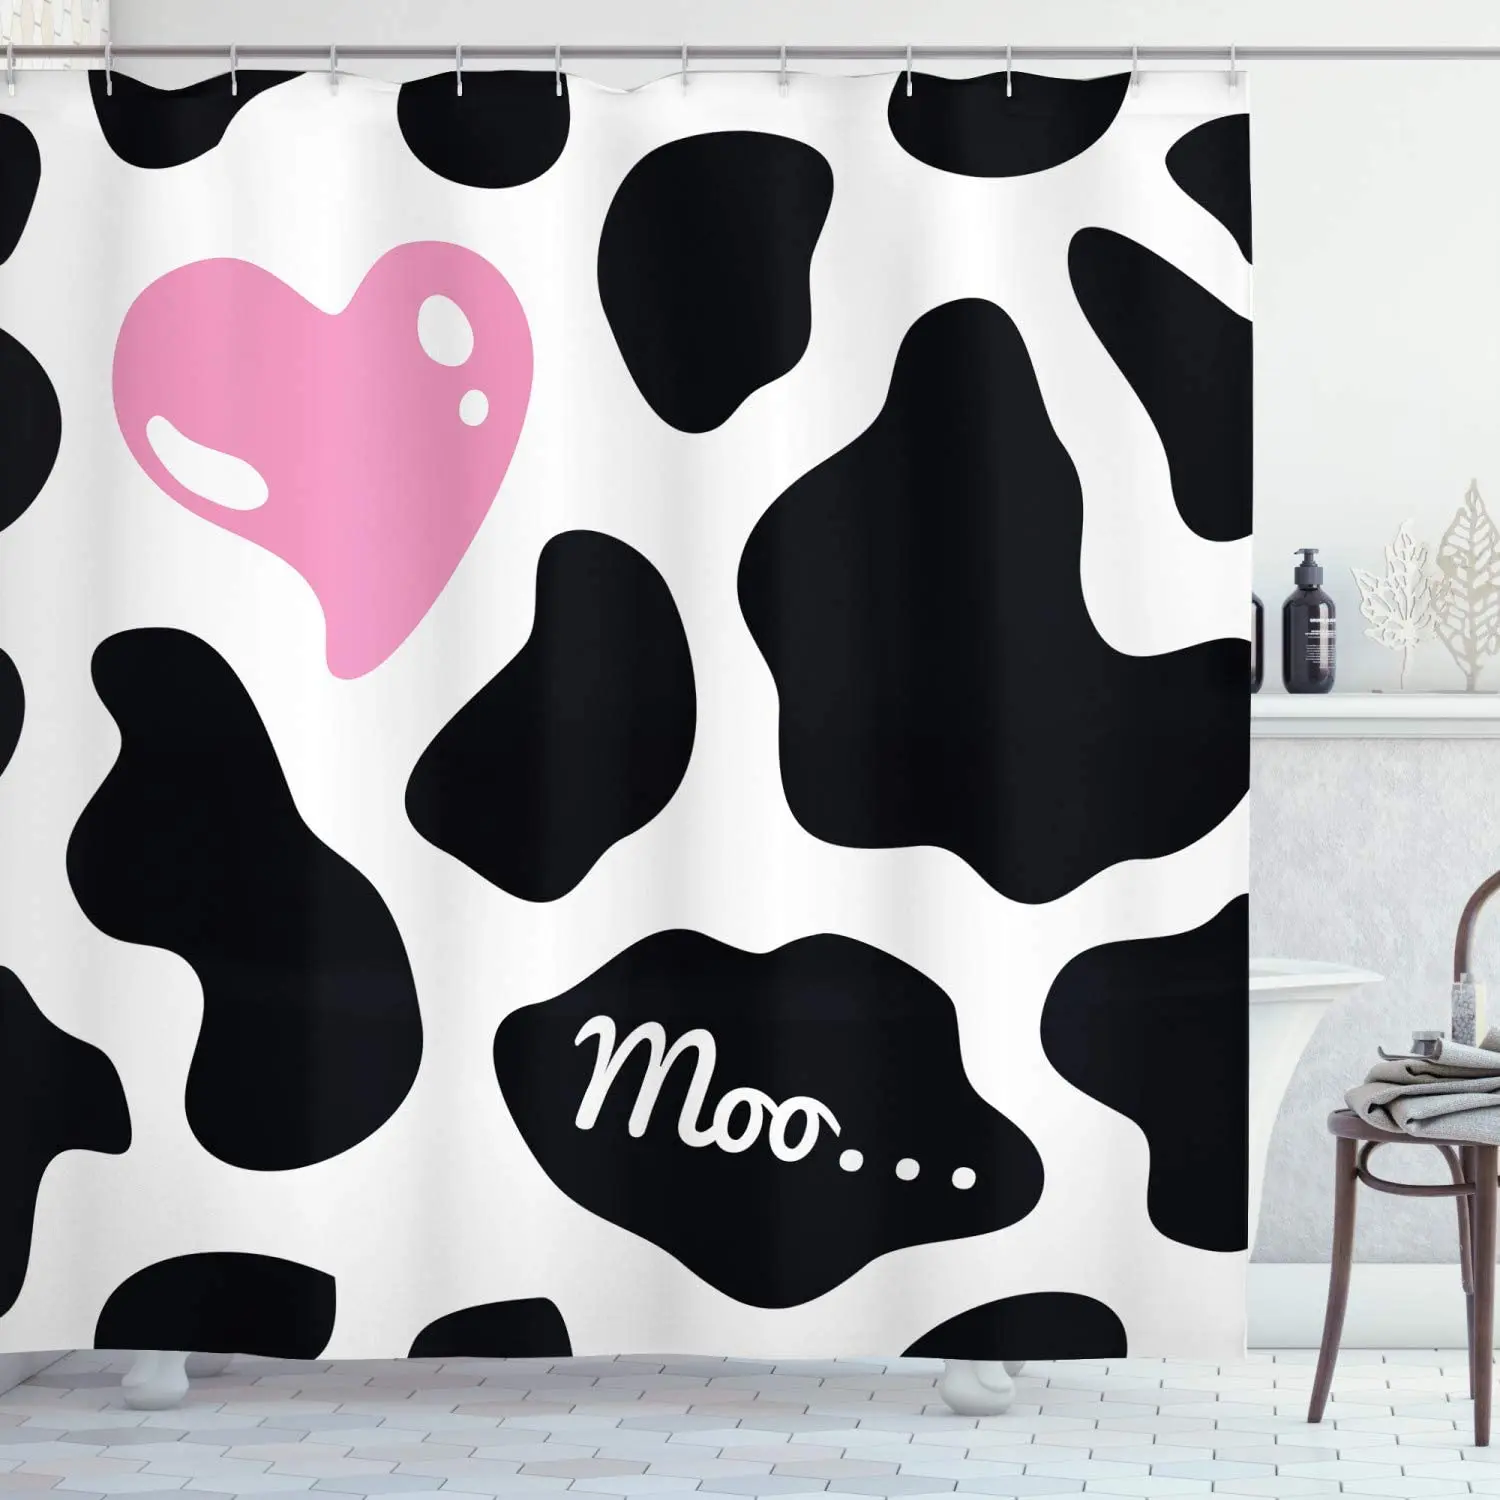 Cow Print Shower Curtain, Camouflage Hide Pattern in Black and White with Pink Heart Shape Moo, Cloth Fabric Bathroom